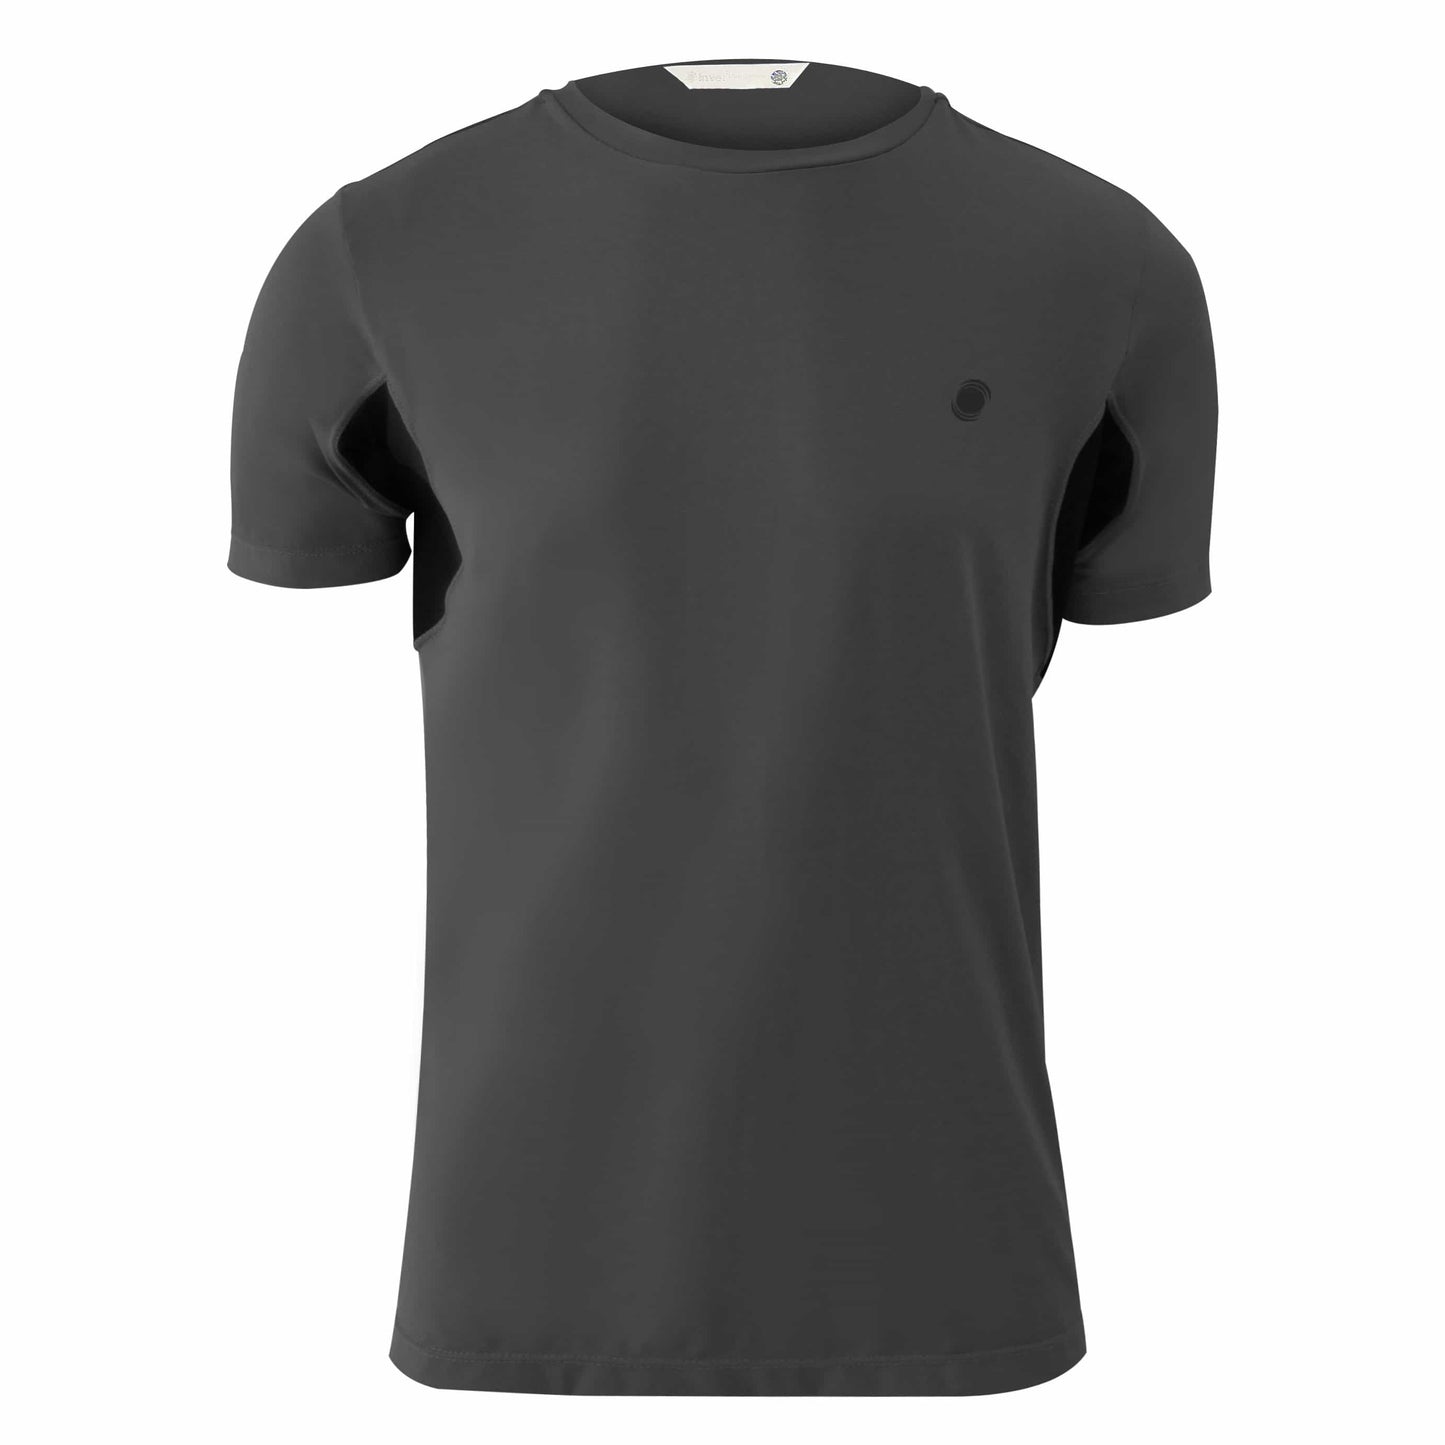 Invel® Therapeutic Men's Short Sleeve Sport Active Wear Shirt with Bioceramic MIG3® Far-Infrared Technology - Invel North America